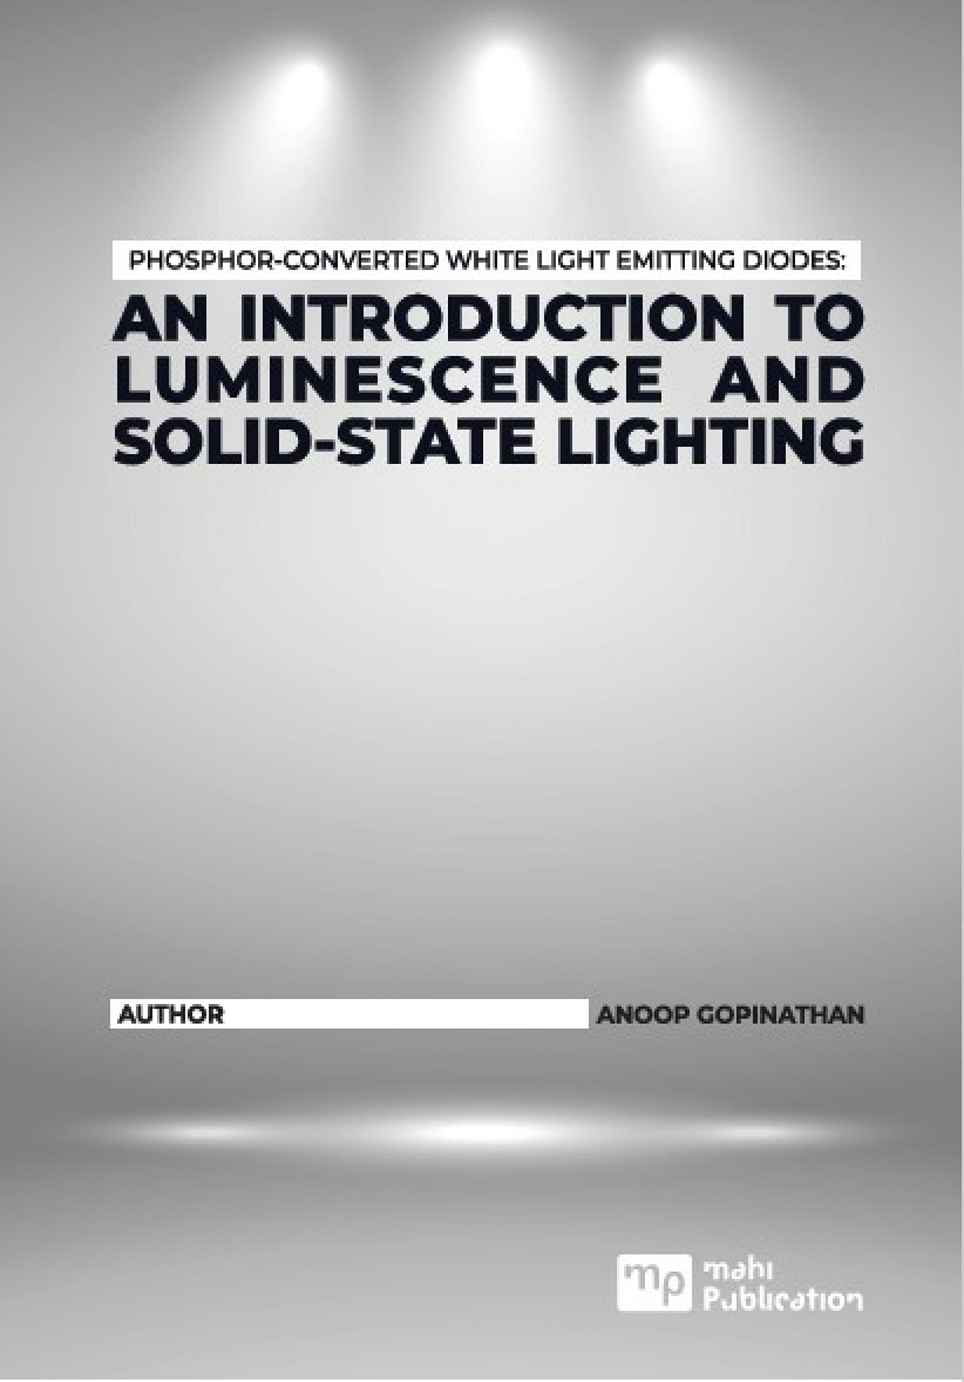 Phosphor-Converted White Light Emitting Diodes An Introduction To Luminescence And Solid-State Lighting